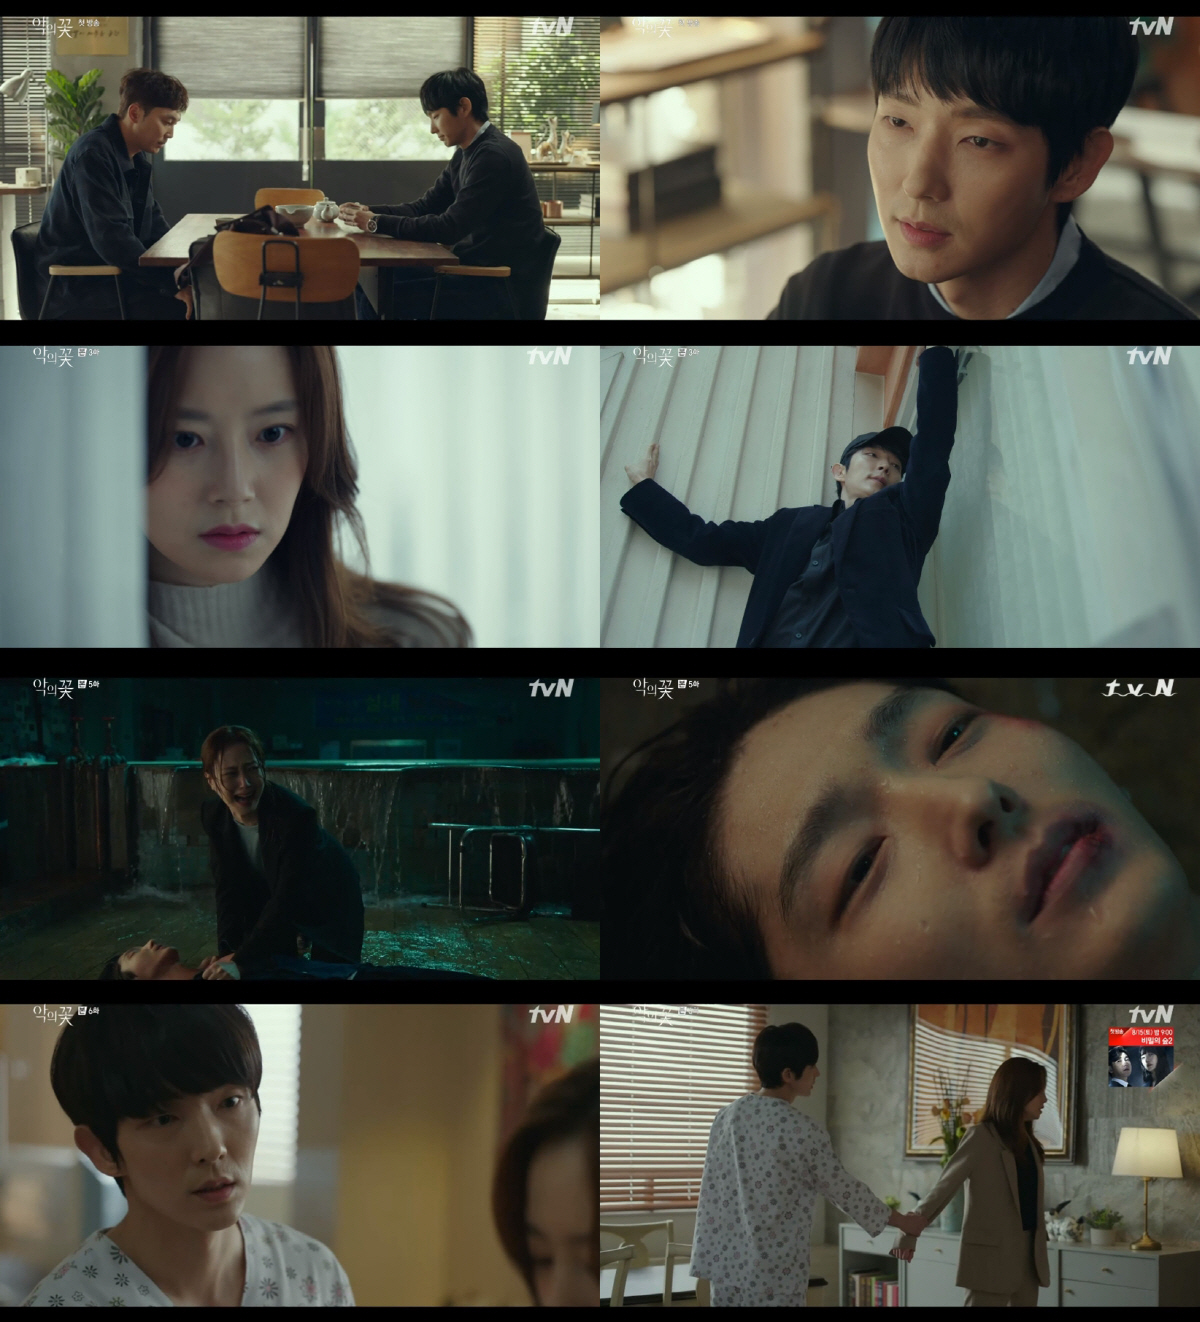 TVNs Drama Flower of Evil (directed by Kim Cheol-gyu/playwright Yoo Jung-hee/production studio dragon, monster union) is a high-density emotional tracing of two people facing the truth that they want to ignore, including the man who played even love, Baek Hee-seong (Lee Joon-gi), and his wife Cha JiWon (Moon Chae-won), who started to doubt his reality ...In the last six episodes, Cha JiWon finally opened the second act when he realized that the identity of Baek Hee-seong was the Murder case The Suspect Do Hyun-soo (Lee Joon-gi).From the first broadcast, I was able to see what kind of scene would have been especially heart-wrenching, while the audience was over-indulging with the crazy speed and the unexpected prediction.#1, Lee Joon-gi A precursor to reality! First meeting with Seo Hyeon-woo, who knows everything!The scene where Kim Moo-jin (Seo Hyeon-woo) appeared in front of Baek Hee-seong who had a normal daily life was the starting point of suspense.There was a nervous conversation between Kim Moo-jin, who did not know that Do Hyun-soo, who was a former alumni, washed his identity with Baek Hee-seong, and Baek Hee-seong, who laughed softly.In particular, the expressionless expression of Baek Hee-seong, who is not disturbed by the story of Murder case which he was pointed out as The Suspect, gave an intense impact and showed the reality of Baek Hee-seong,#3 inning, heart-throbbing couple suspense! Lee Joon-gi vs. Moon Chae-wons breathless veranda hide-and-seek!Baek Hee-seong, who was searching his house to find Kims weakness, rushed out of the veranda to the sudden sound of his wife and police.The dangerous appearance of the Baek Hee-Seong hanging from the outer walls of the high-rise apartment gave a goose bump, and Cha JiWon, who came to the veranda, tried to walk the curtain covering the Baek Hee-Seong beyond the window, making his heart more chewy.At that moment, Baek Hee-Seong turned her gaze to the base where she called herself, but the moments tension was enough to distract viewers.# 5, melodrama explosion ending! Moon Chae-wons monologue of Lee Joon-gi, who learned the feeling of sorry in The Scream!In the fifth ending, Baek Hee-seong, who was kidnapped and tortured by Murder, and Cha JiWon, who was the Scream after saving him, left a darker than ever.Most of all, Baek Hee-seong, who turned away from the feeling of sorry in the past, said, I now know what that means.I was left with a monologue, Im sorry for you. This was a scene that meant that Cha JiWon had made me feel better and changed.#6, the doubt that started! Moon Chae-won, who was in turmoil, the drama and drama look of Lee Joon-gi, who was embarrassed!Cha JiWon found out that Baek Hee-seong was the Murder The Suspect Do Hyun-soo he was chasing.The suspicion that her husband, who she loved for 14 years, was not who she knew, and that she might even have done Murder, led her to collapse.And all Cha JiWon could do was ask the love-hate for Baek Hee-seong and the question What the hell are you!Baek Hee-seong was not sure what to do with the embarrassment when Cha JiWons complex feelings burst out.He had always observed her expression and confirmed it, because it was the first emotion he had never learned anywhere, unknown.The change between the two people between doubt and faith is raising the heart, but it is raising the question of how the future relationship will flow.The TVN tree drama Flower of Evil, which shows the feast of the scenes that make it impossible to watch for a moment like this, is broadcast every Wednesday and Thursday at 10:50 pm.